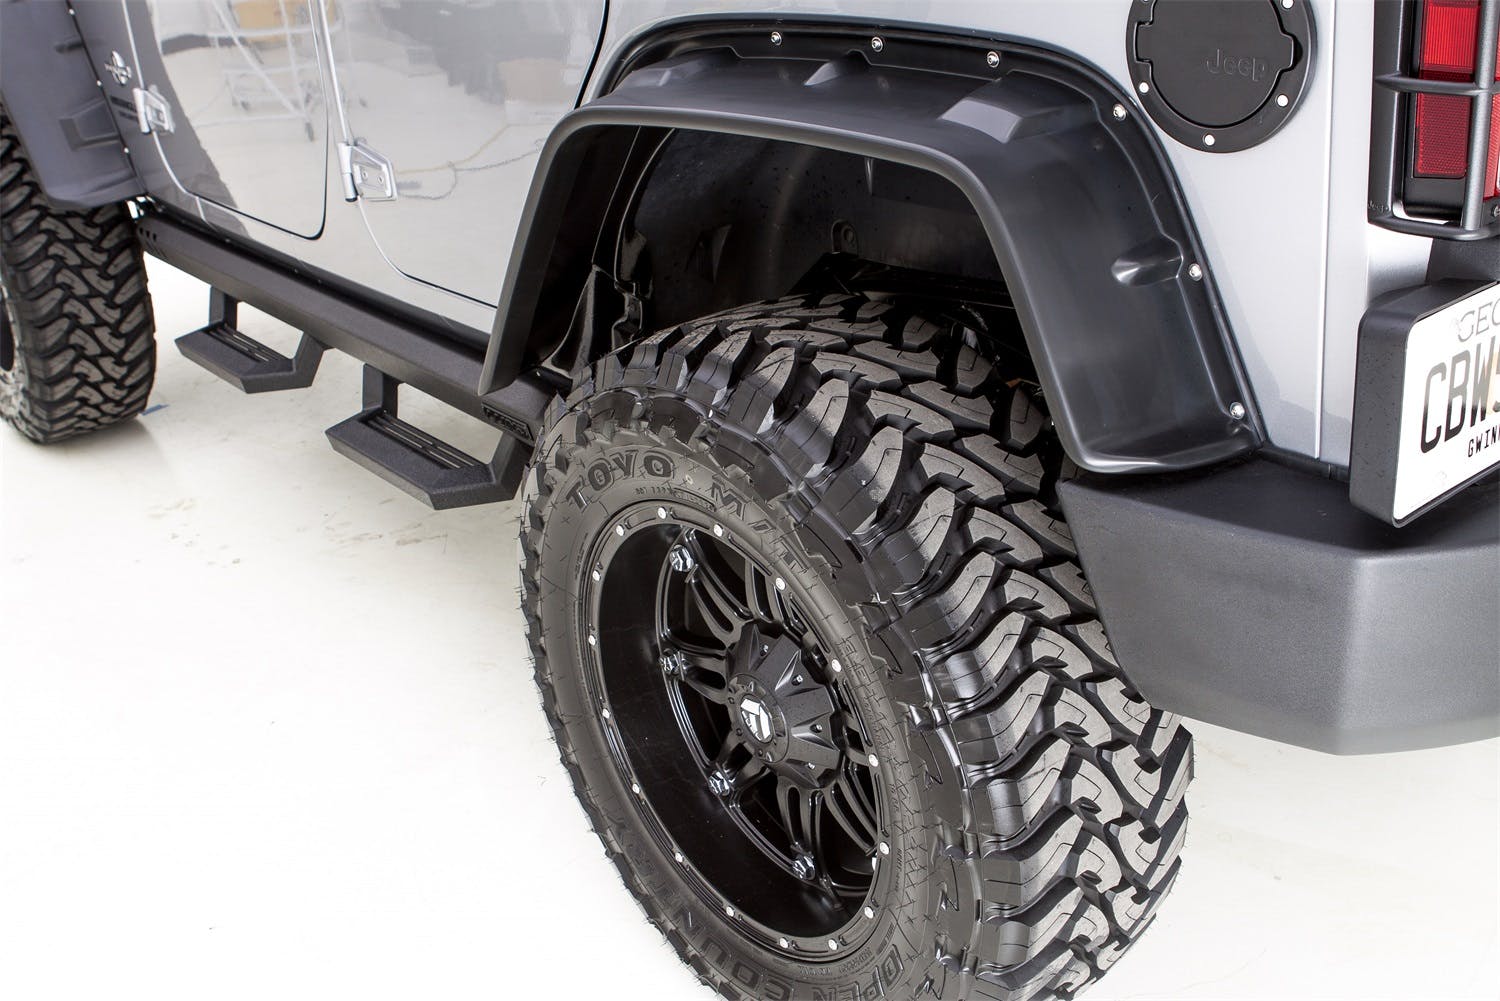 LUND FX606T-B Flat Style Fender Flare Set - Front and Rear, Textured, 4-Piece Set, Black FX-JEEP FLAT STYLE 4PC TEXTRD FX-JEEP FLAT STYLE 4PC TEXTRD